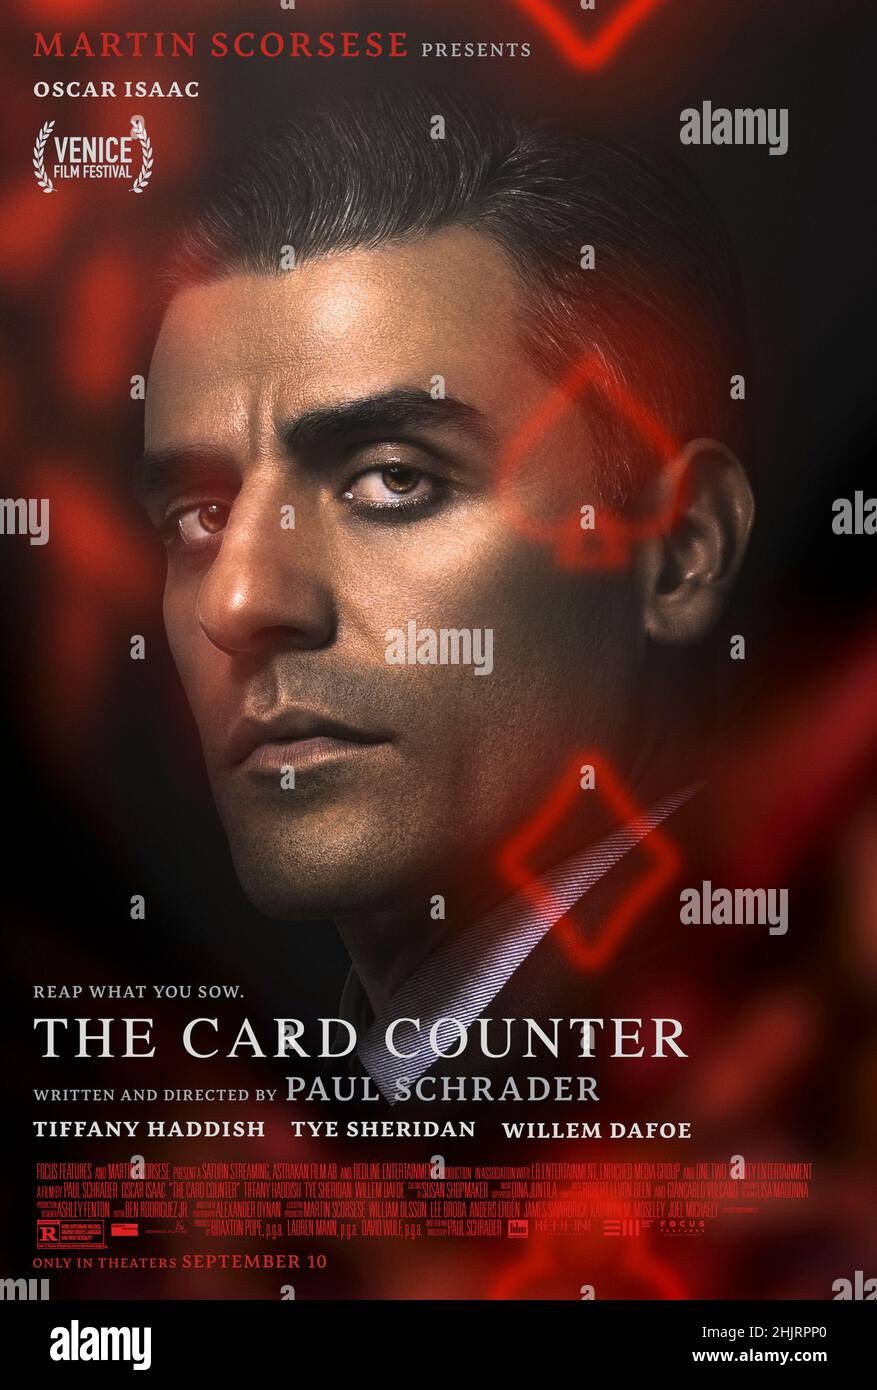 The Card Counter (2020) directed by Paul Schrader and starring Oscar Isaac, Tiffany Haddish and Tye Sheridan. Revenge thriller about an ex-military interrogator turned gambler haunted by the ghosts of his past. Stock Photo